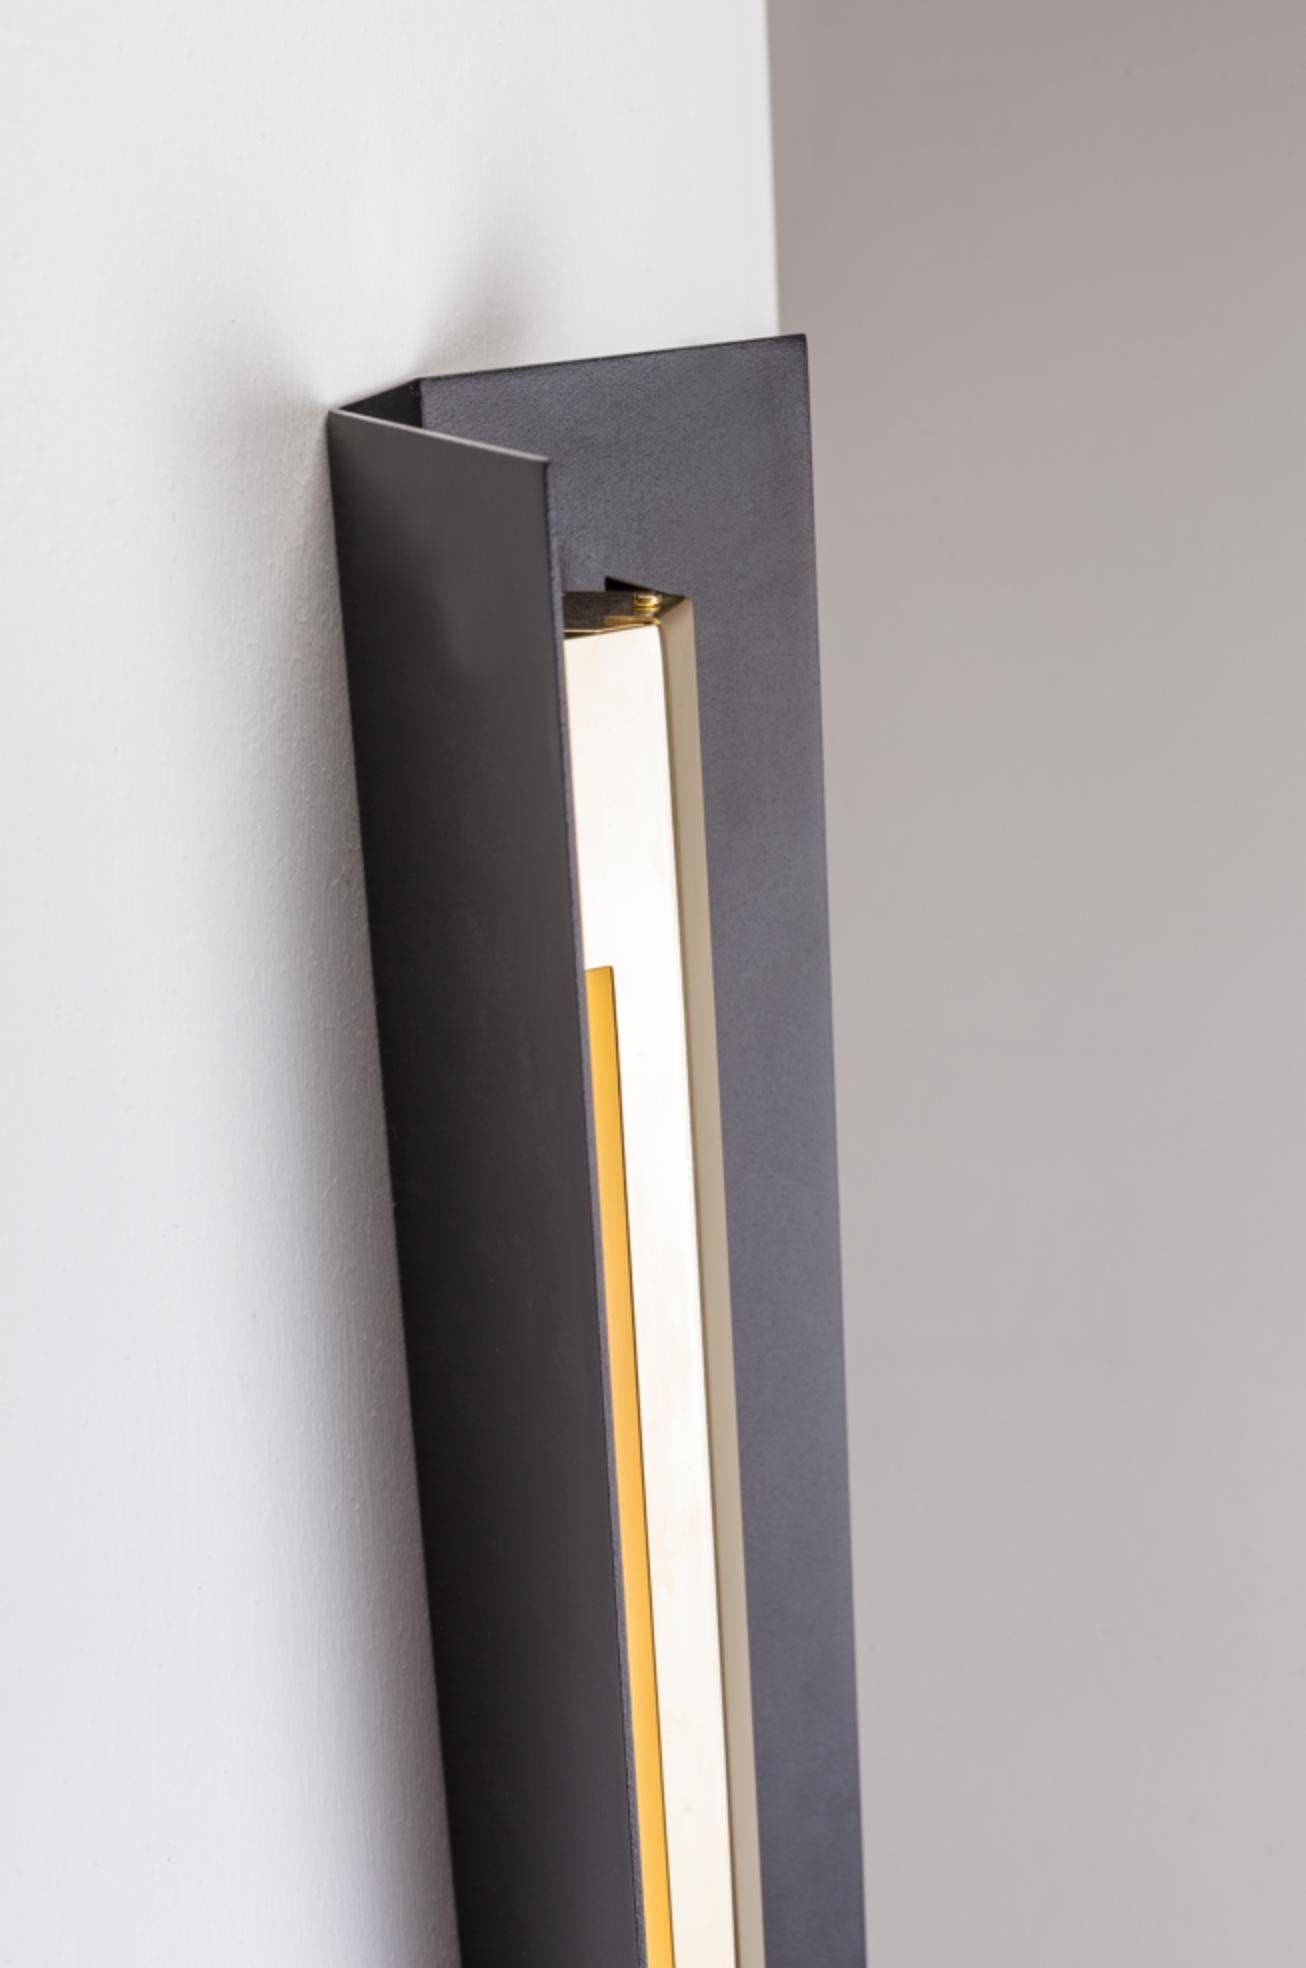 Small Misalliance Ex jet black wall light by Lexavala.
Dimensions: D 16 x W 70 x H 8 cm
Materials: powder coated shade with details made of brass or stainless steel.

There are two lenghts of socket covers, extending over the LED. Two short are